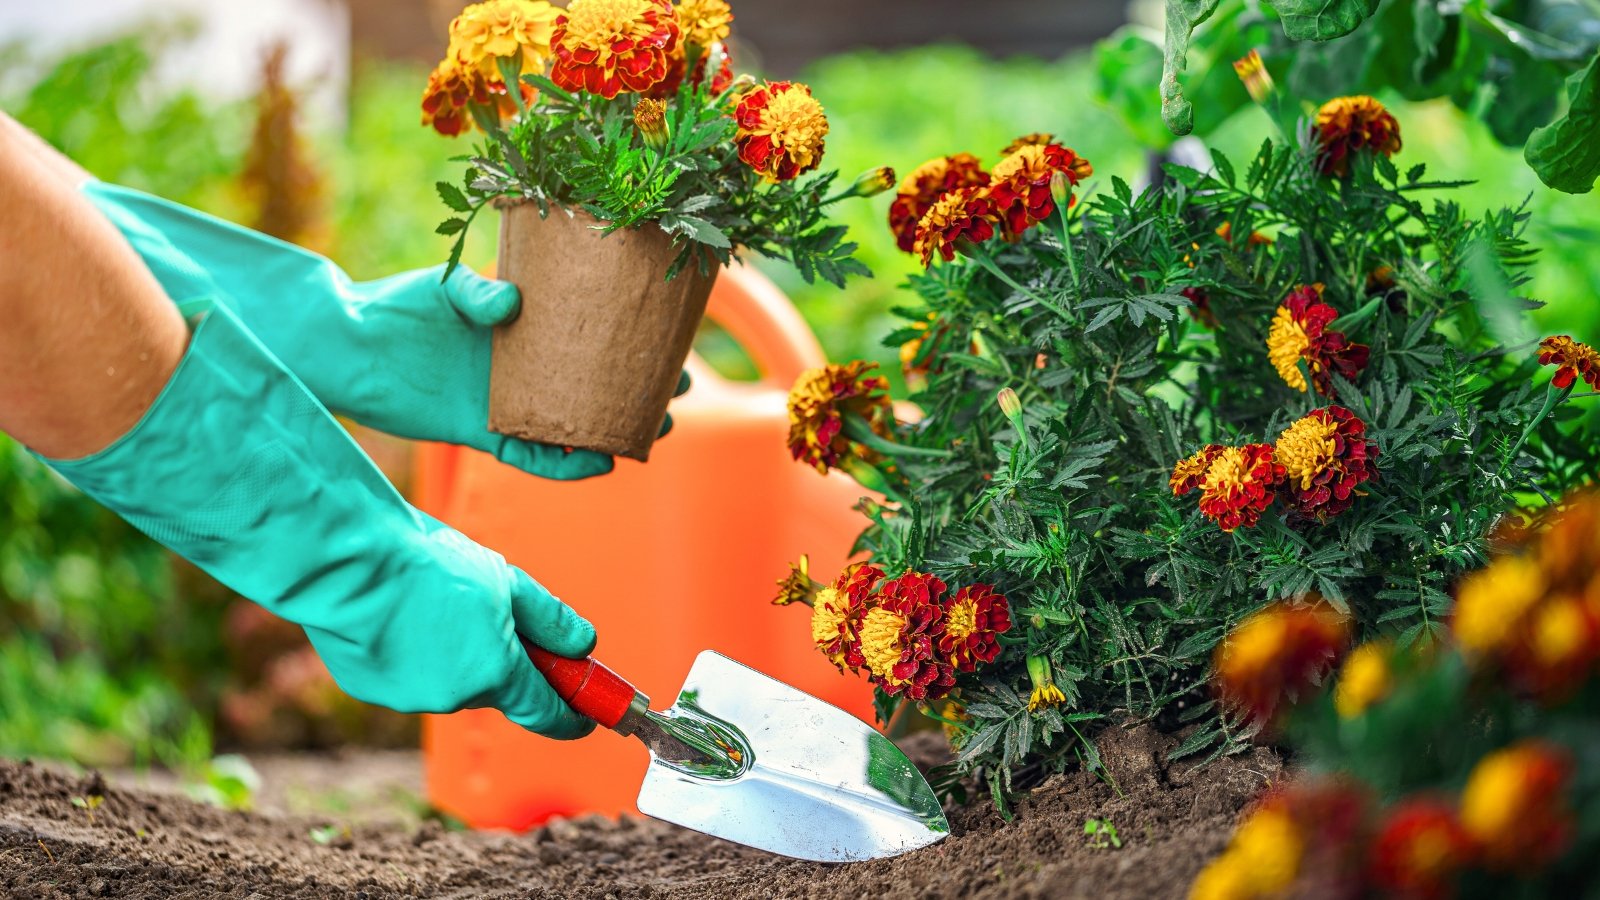 Close-up of a gardener's hands in blue rubber gloves and with a garden trowel transplanting flowering marigold seedlings in a sunny garden.